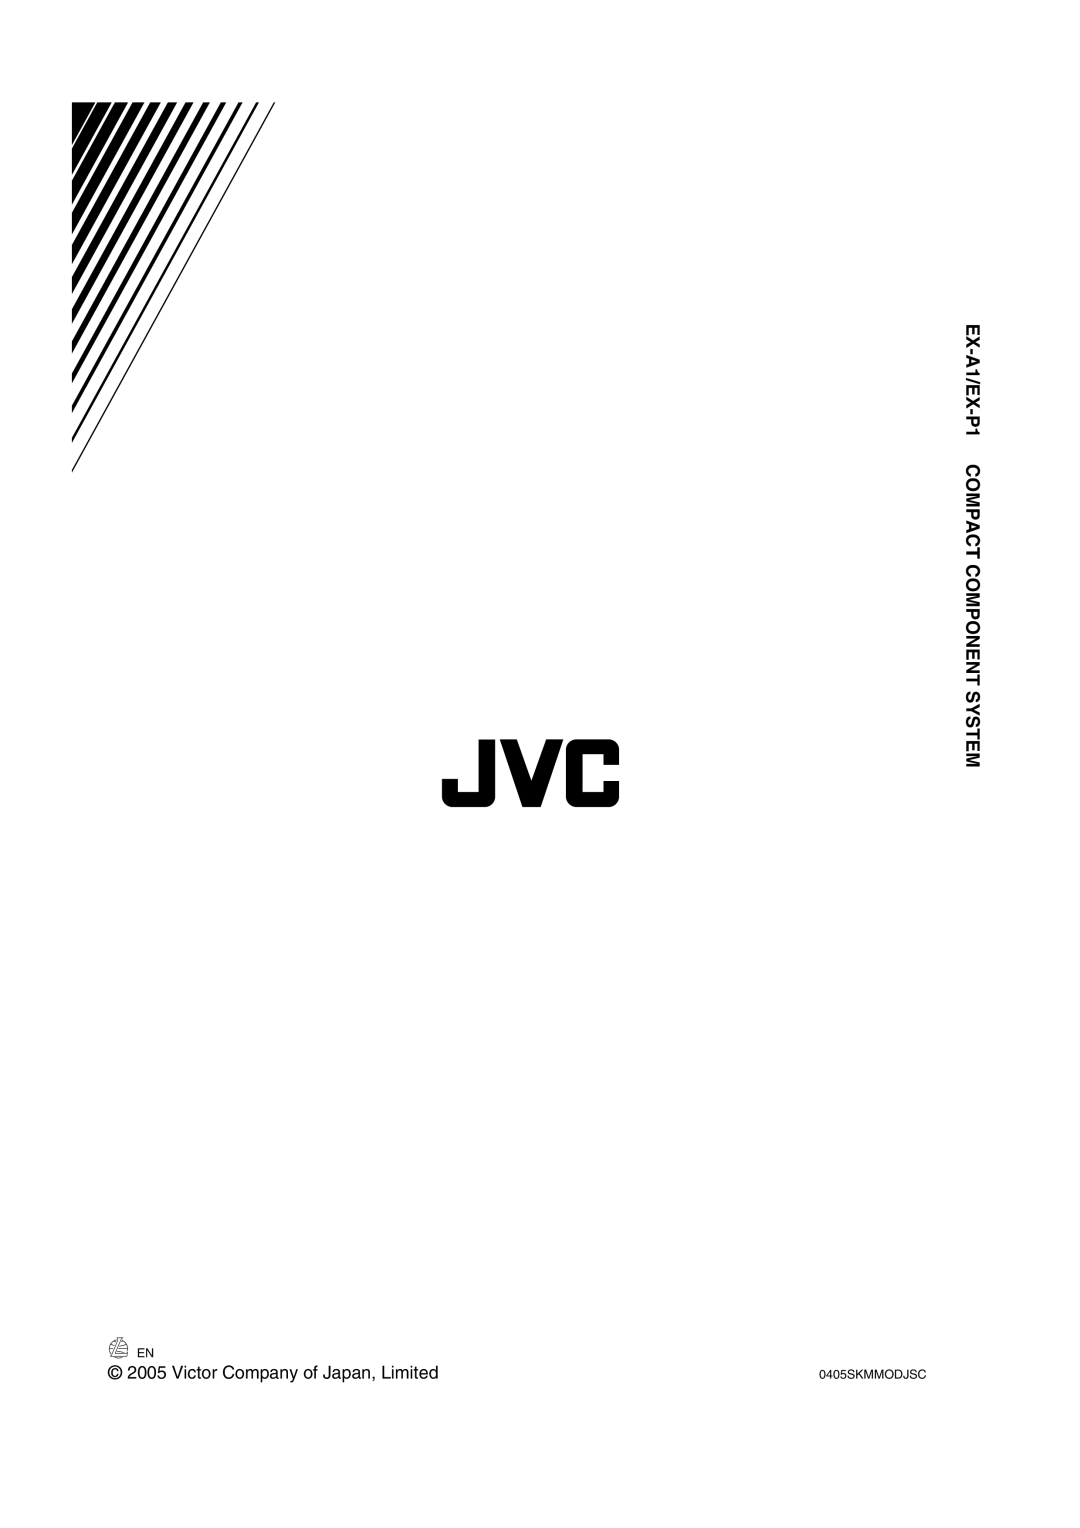 JVC LVT1284-004B manual EX-A1/EX-P1COMPACT COMPONENT SYSTEM, c 2005 Victor Company of Japan, Limited 